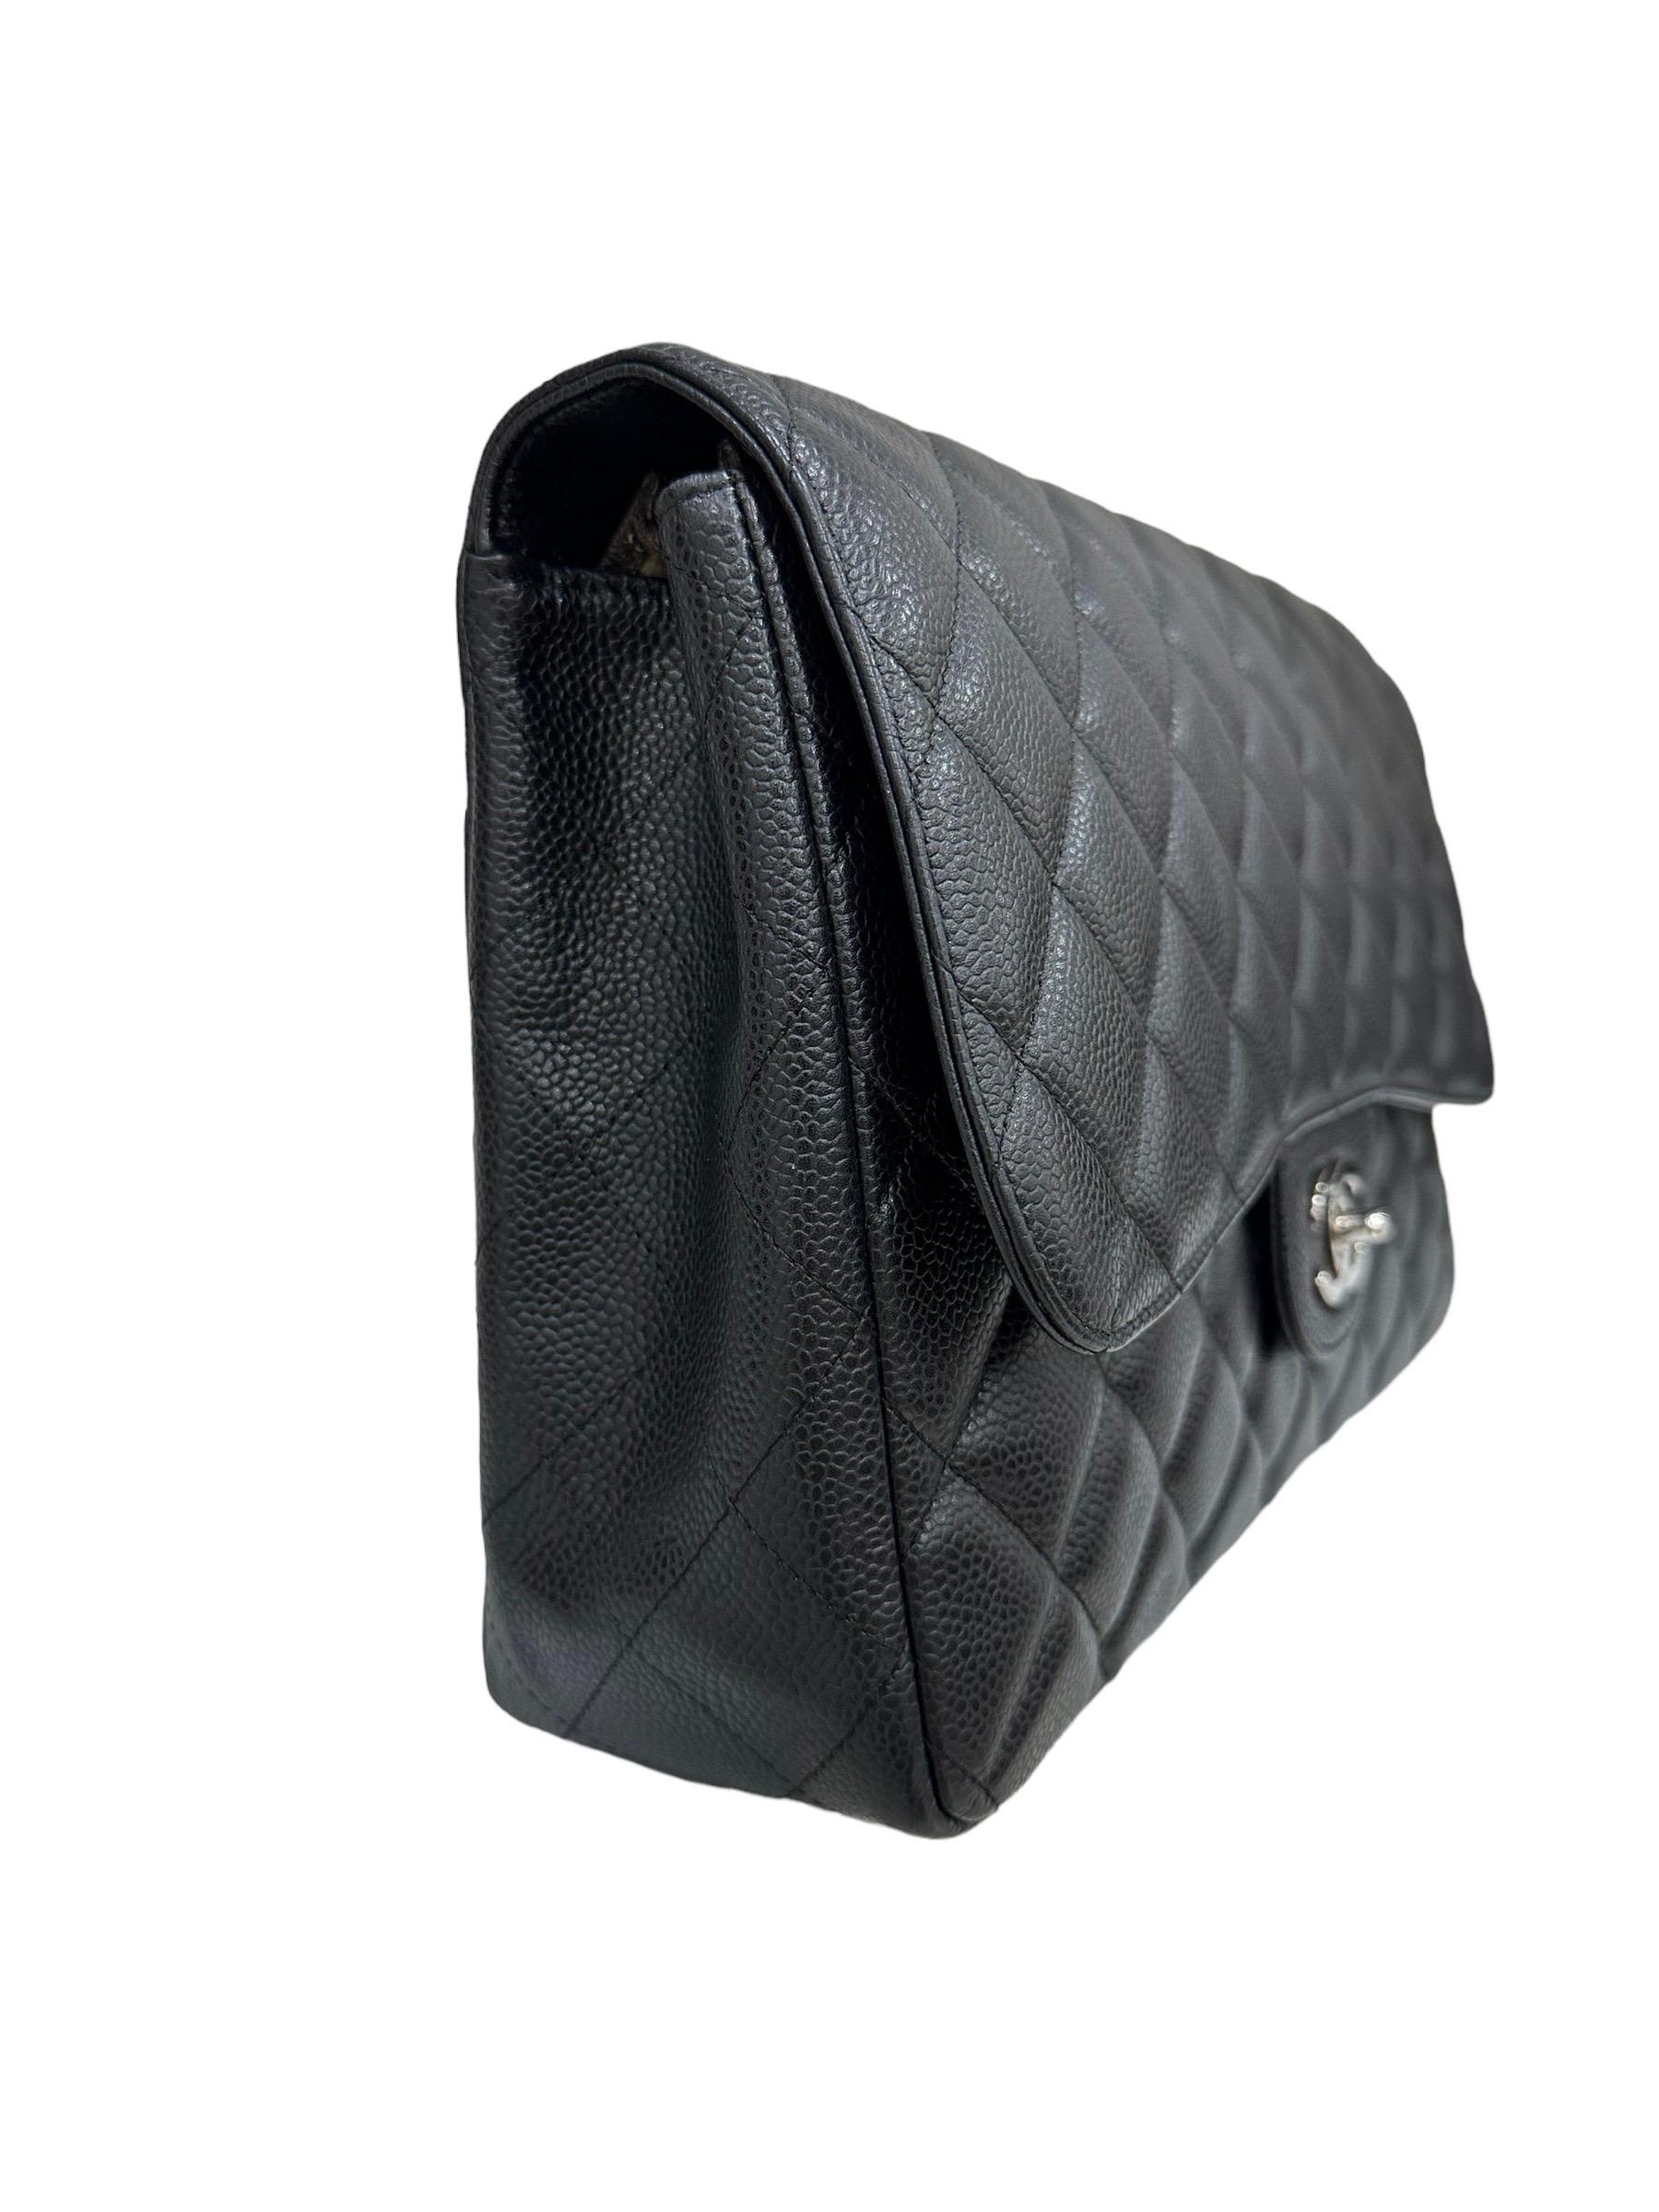 2009 Chanel Jumbo Black Caviar Leather Top Shoulder Bag  In Excellent Condition For Sale In Torre Del Greco, IT